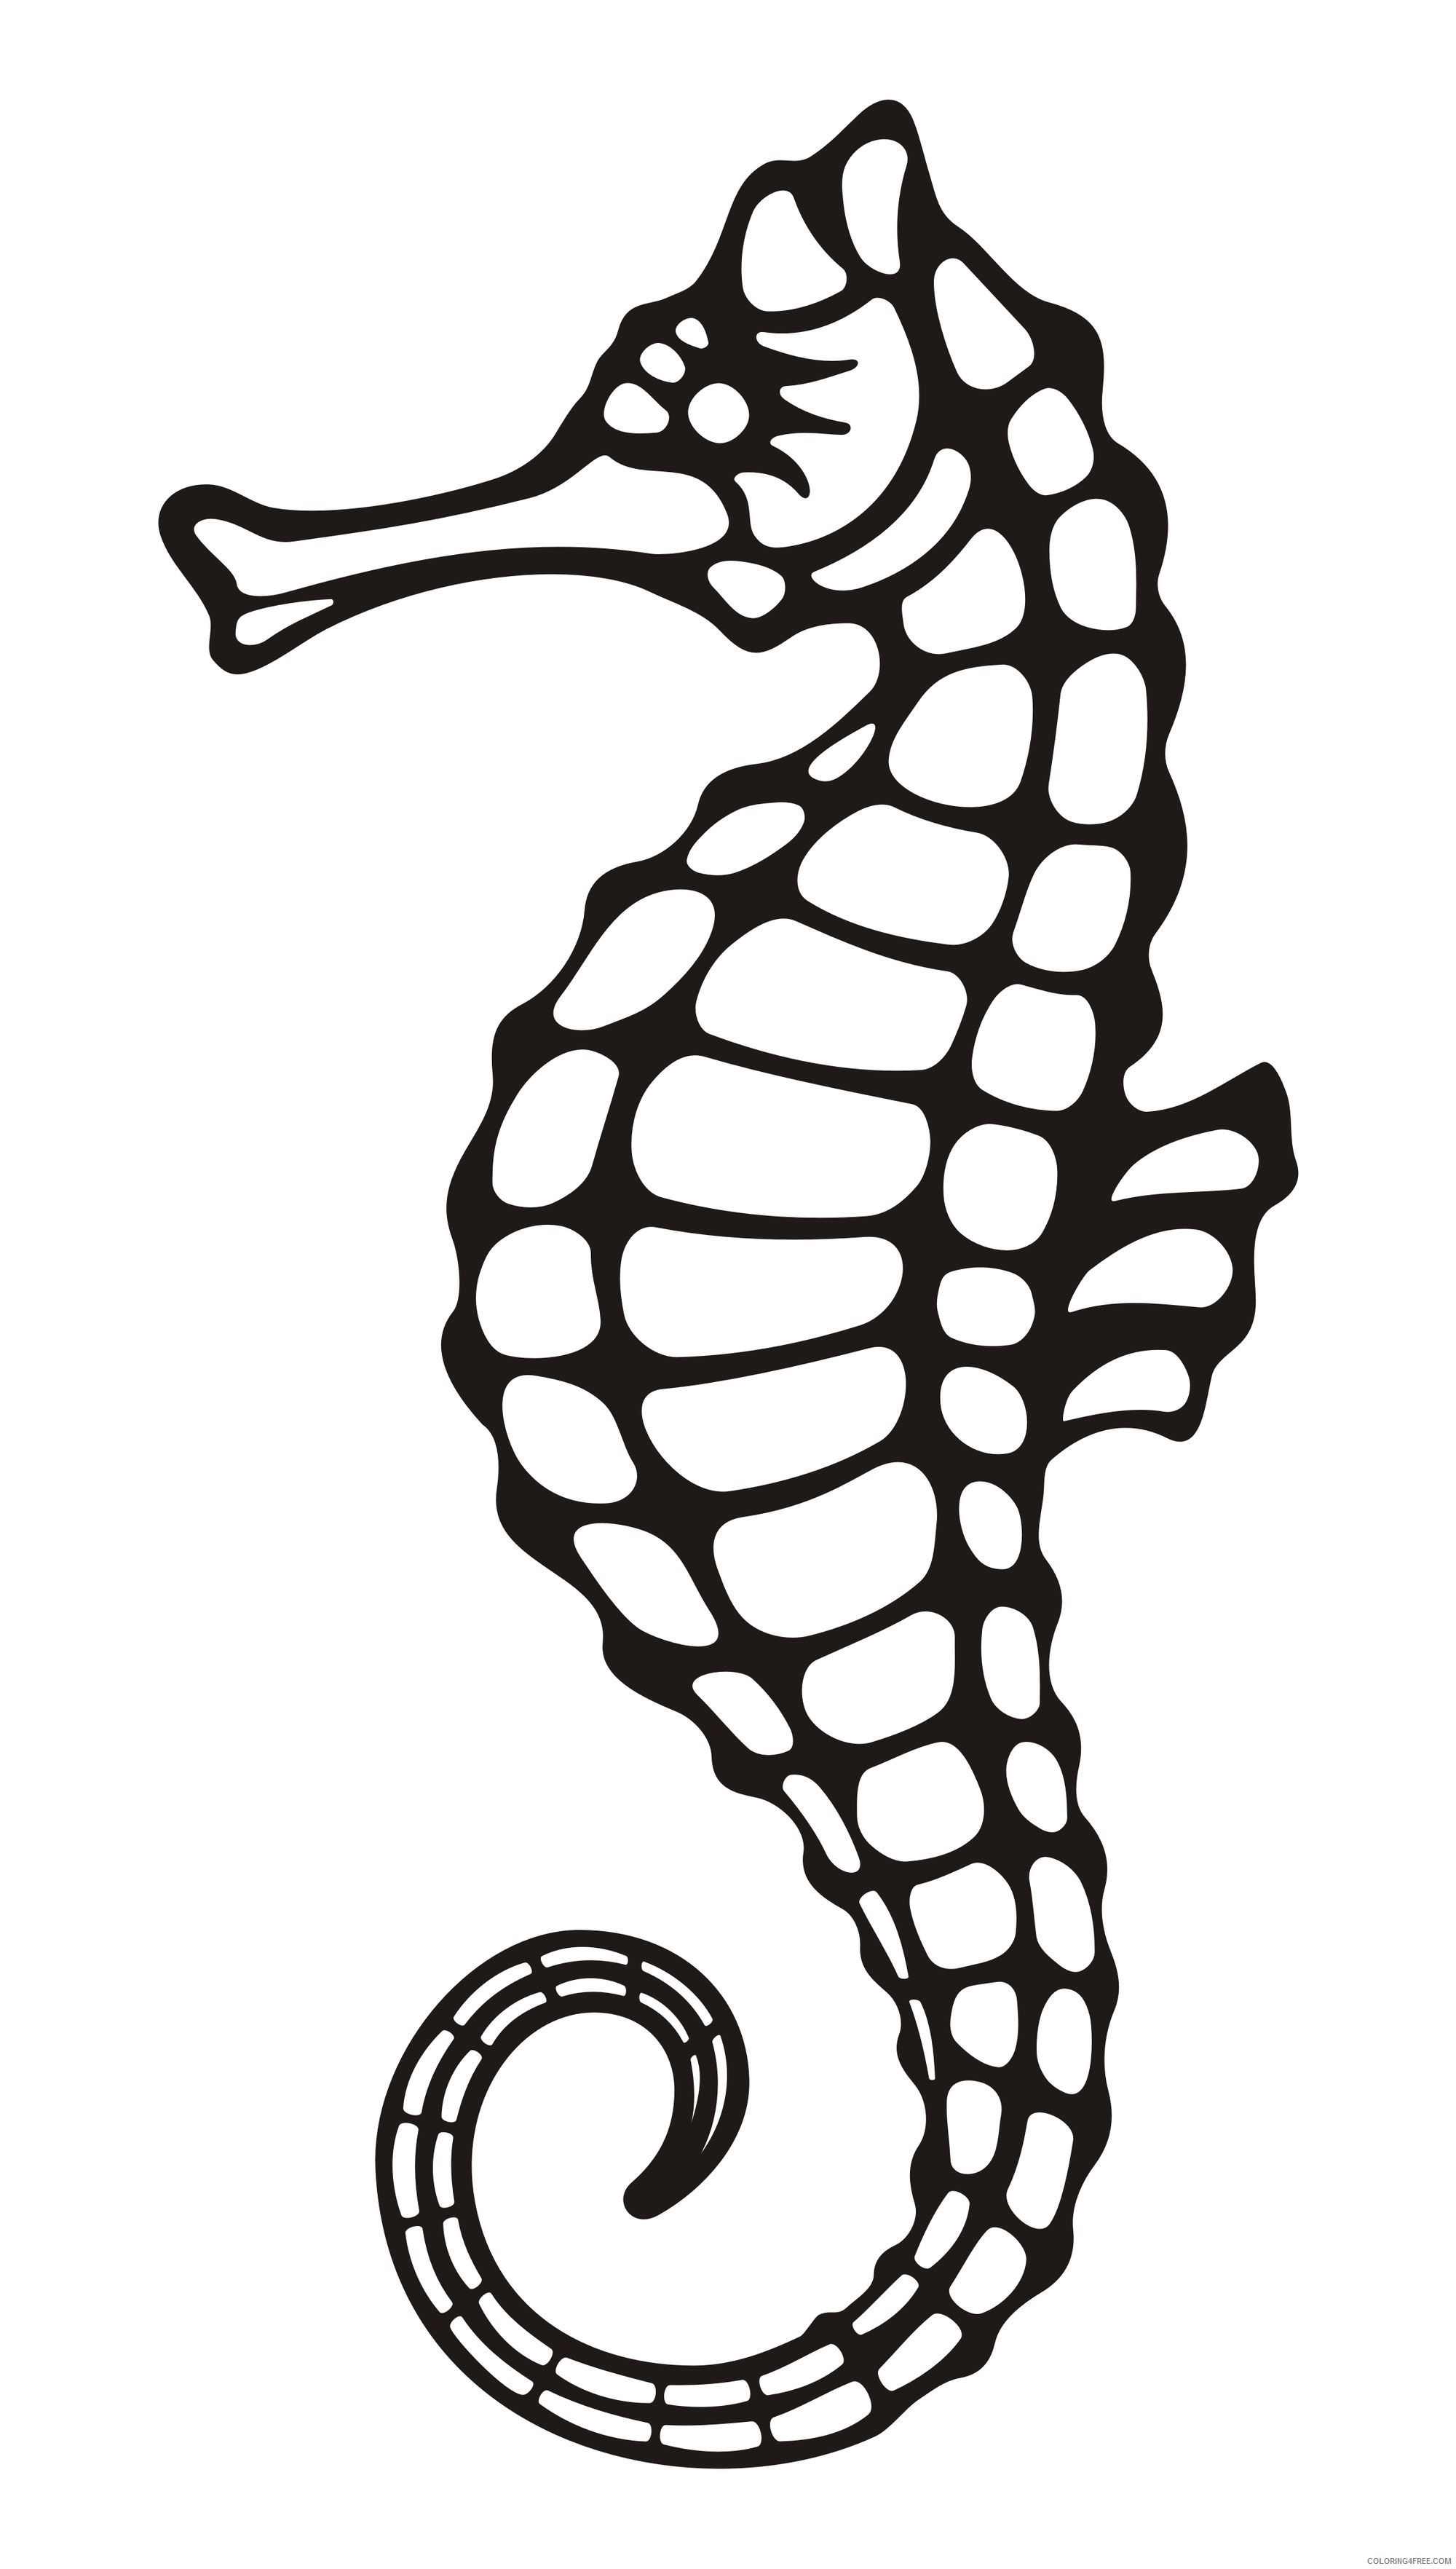 Black and White Seahorse Coloring Pages sea horse drawing ZjBH0g clipart Printable Coloring4free